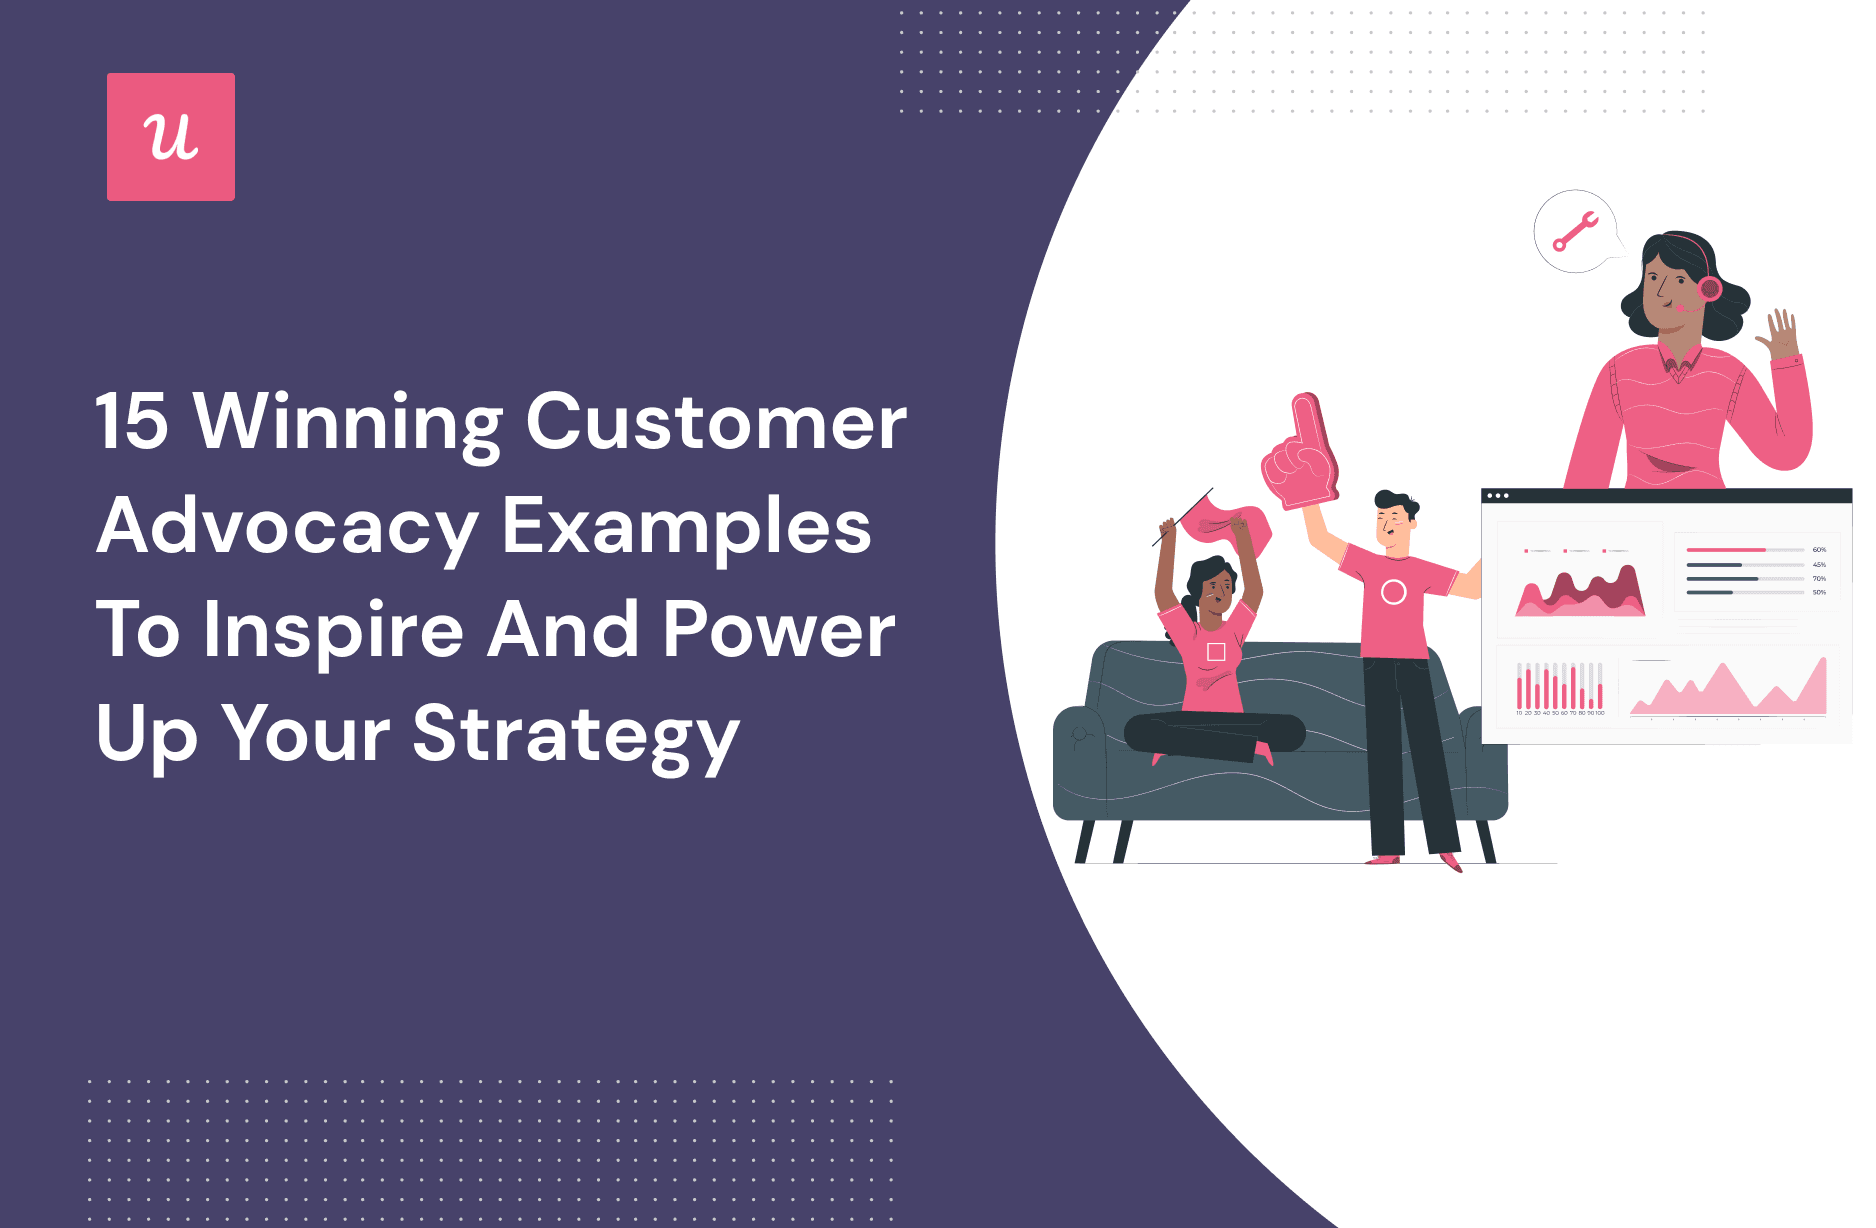 15 Winning Customer Advocacy Examples to Inspire and Power Up Your Strategy cover